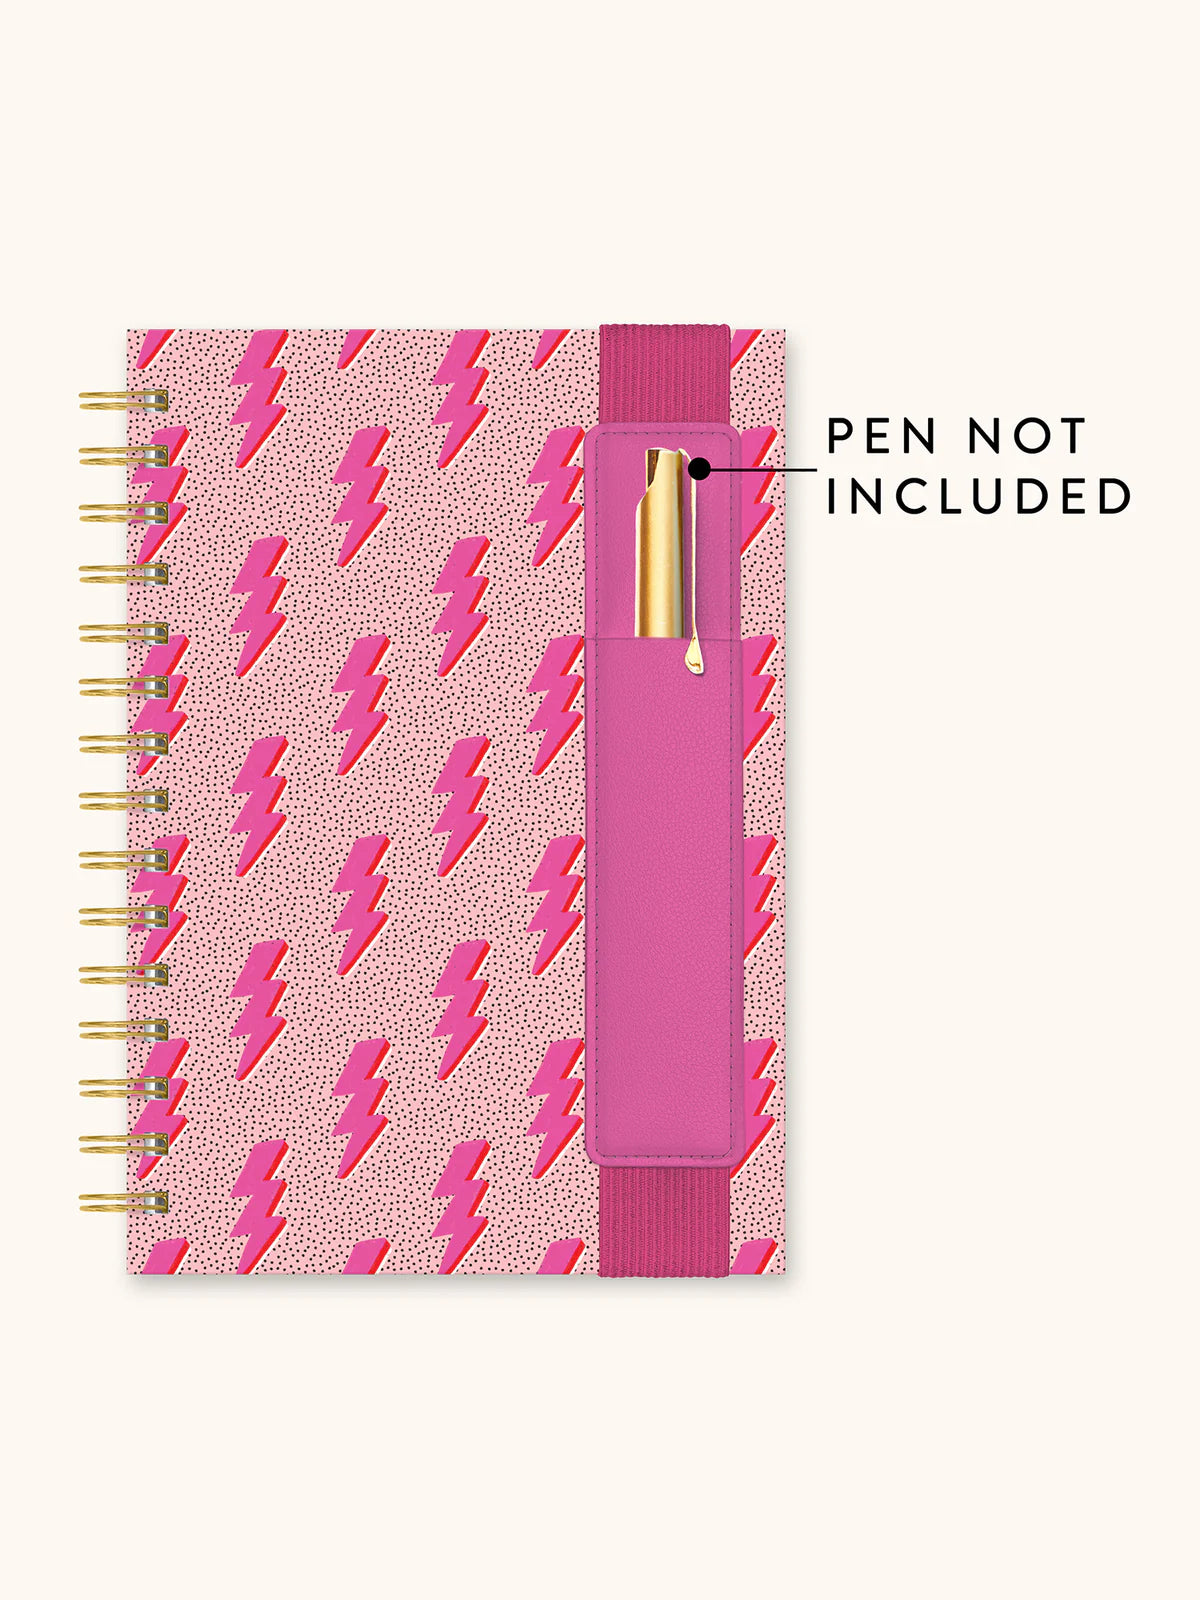 Oliver Notebook with Pen Pocket: Charged Up